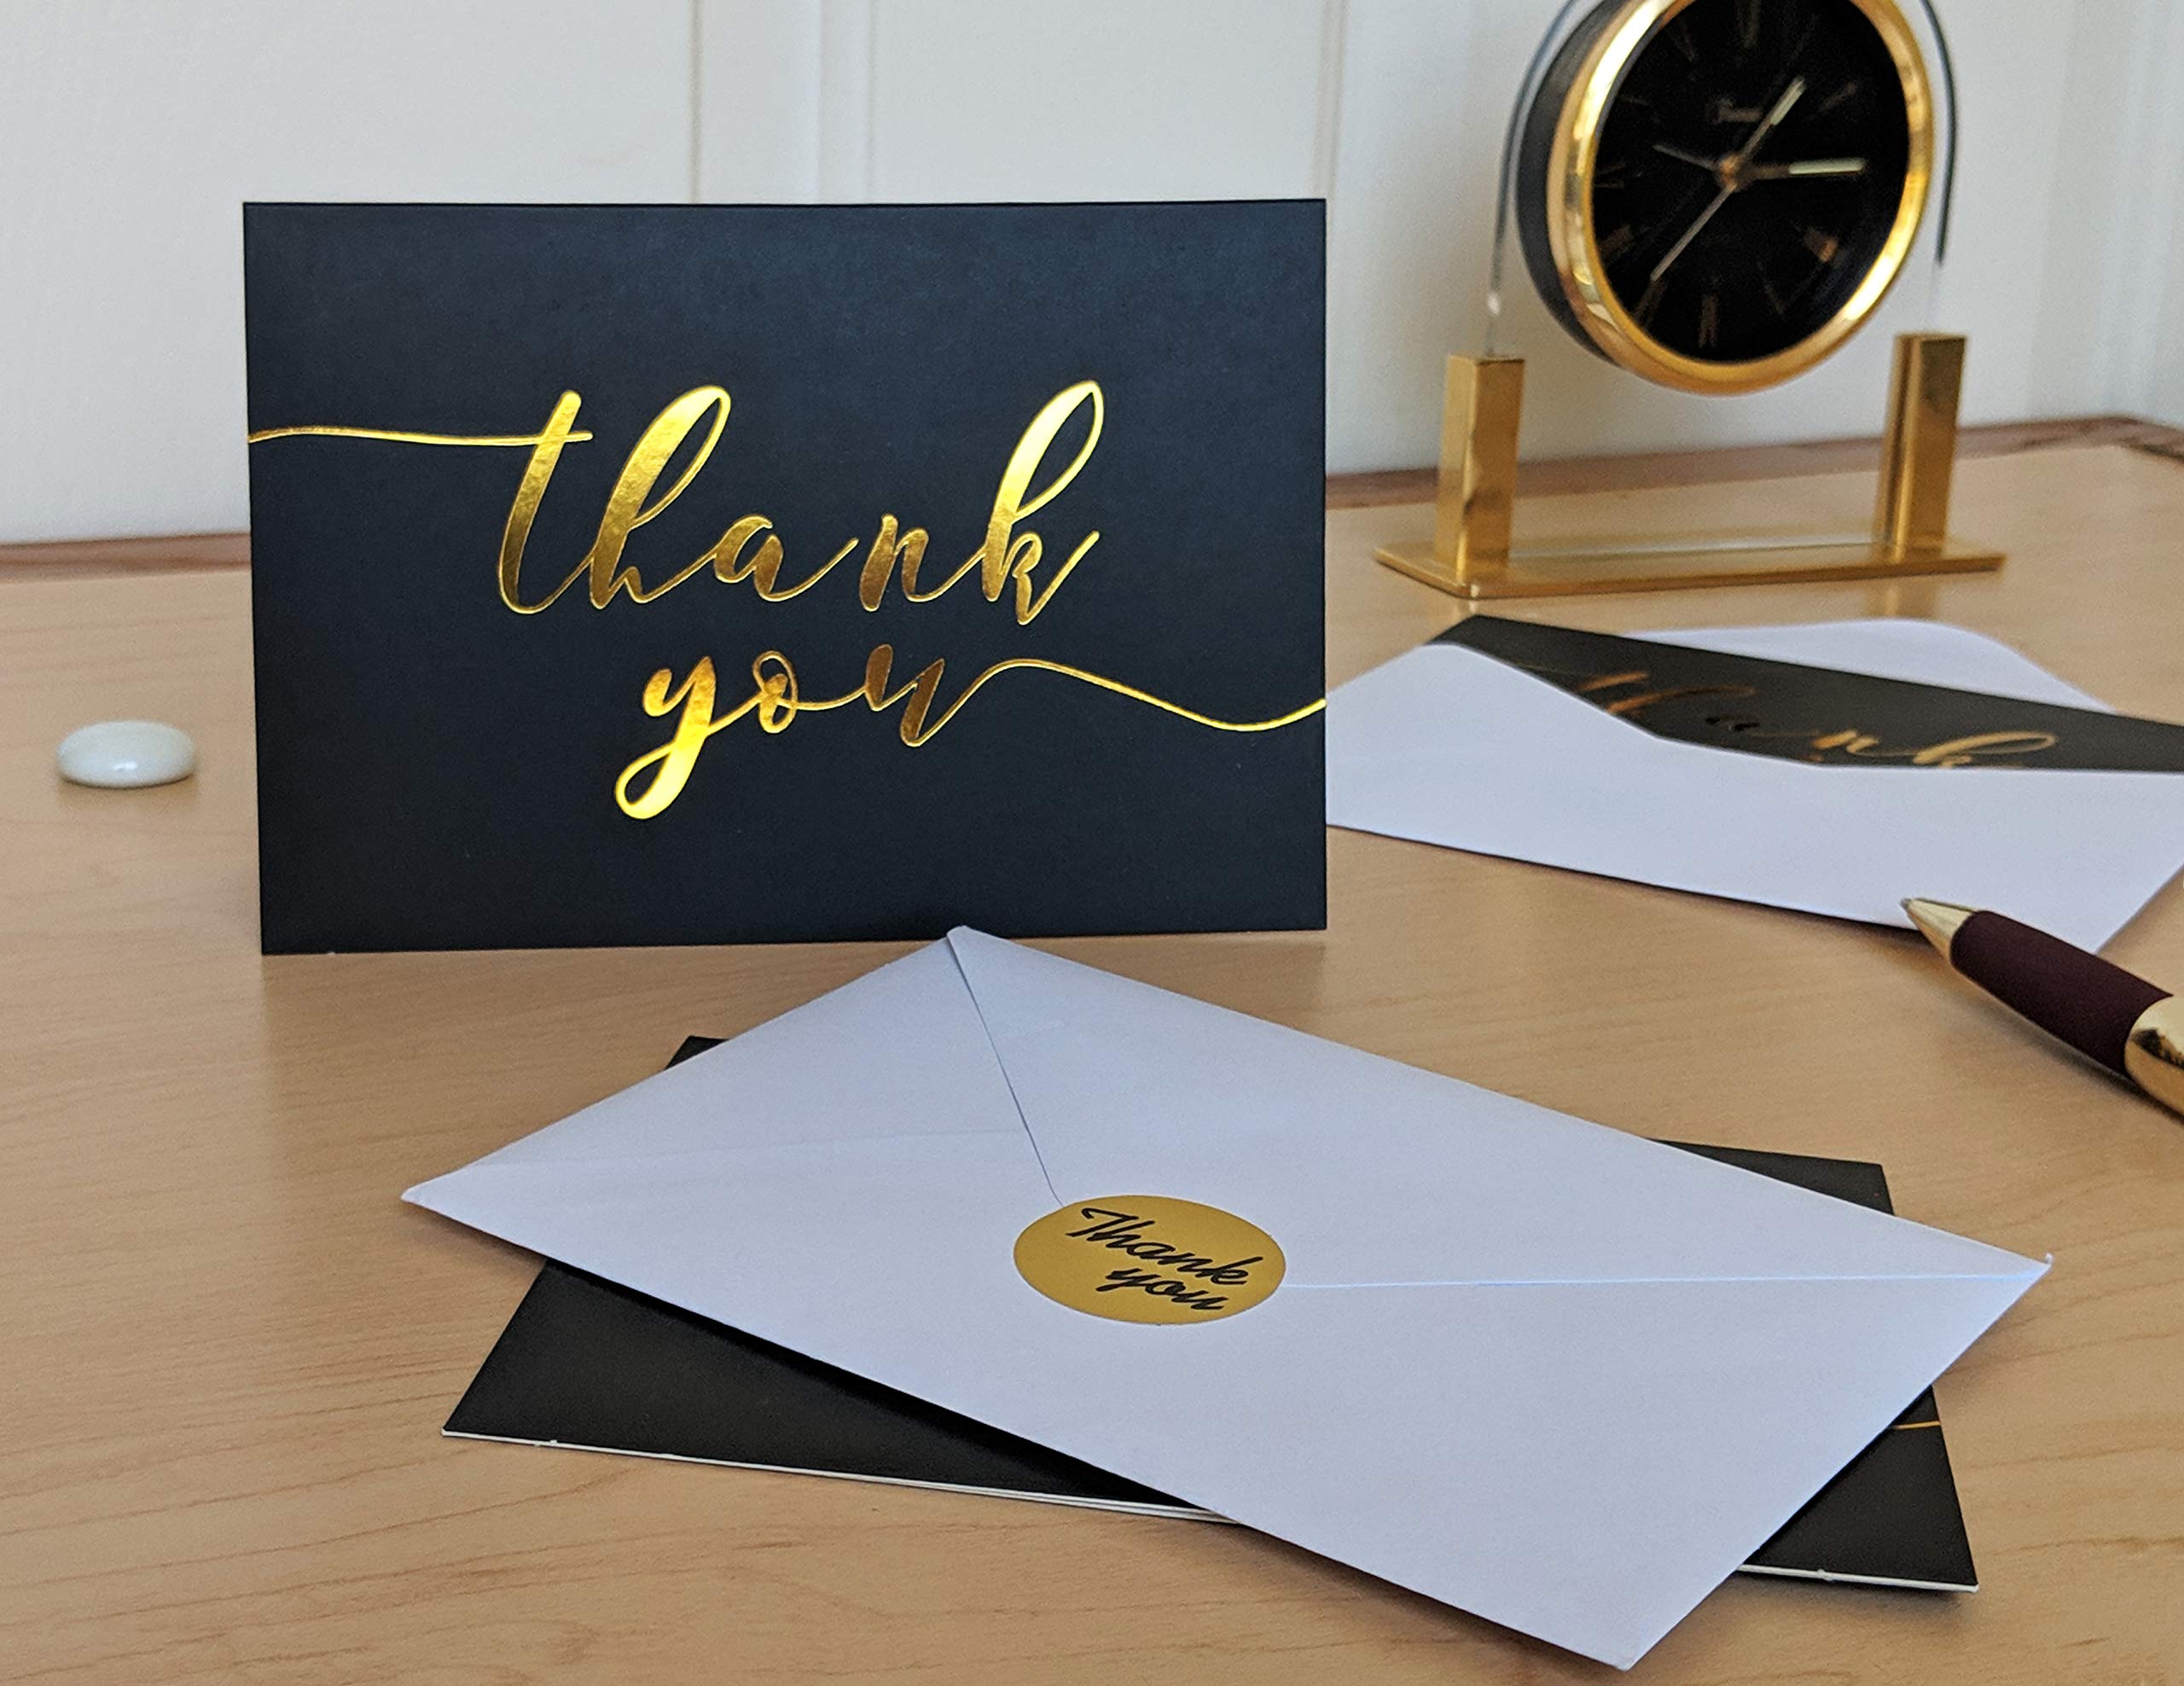 100 Thank You Cards in Black with Envelopes and Stickers - Quality Elegant Bulk Notes Embossed with Gold Foil Letters for Weddings, Graduations, Engagements, Business, Formal, Funeral, 4x6